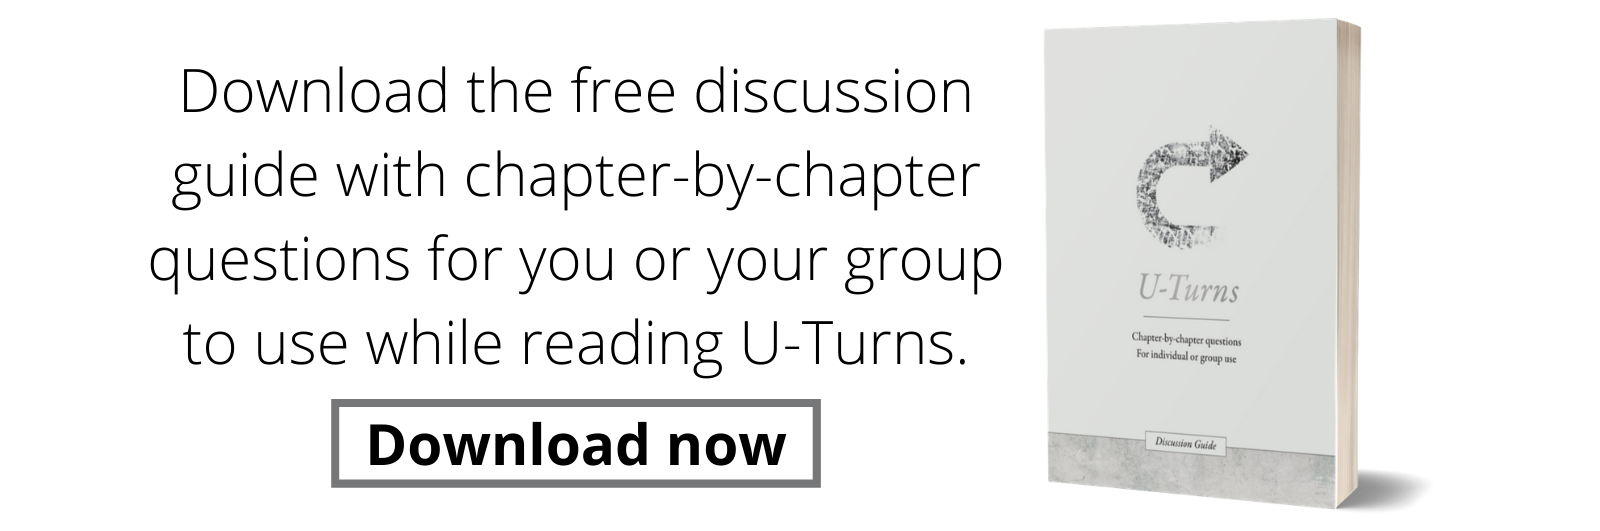 Download the U-Turns discussion guide